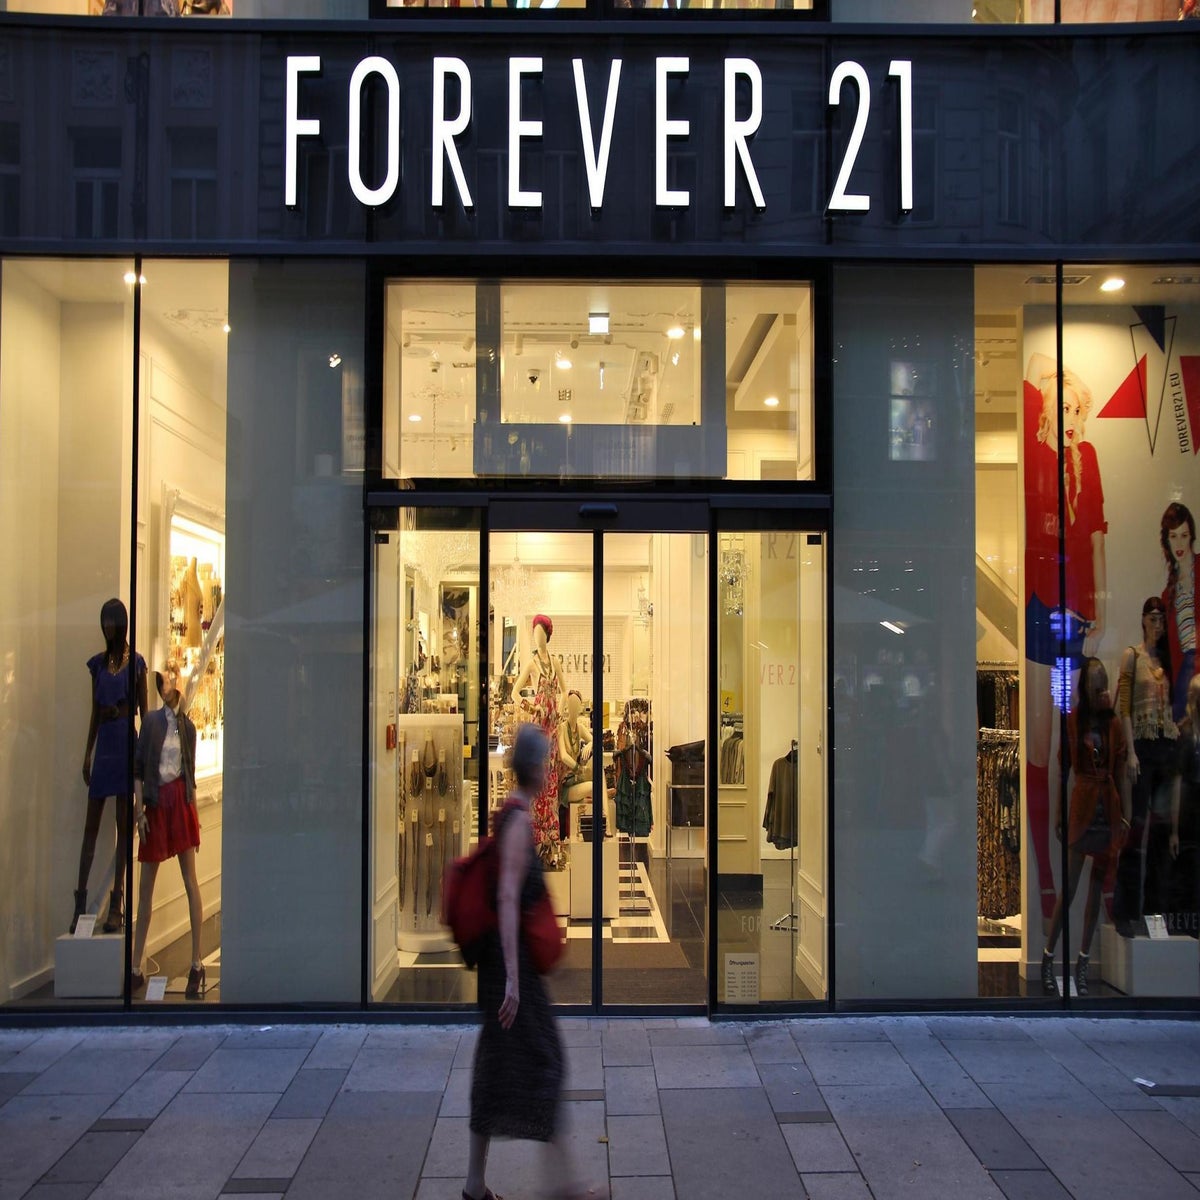 An Open Letter To Forever 21, From A Fat Customer 